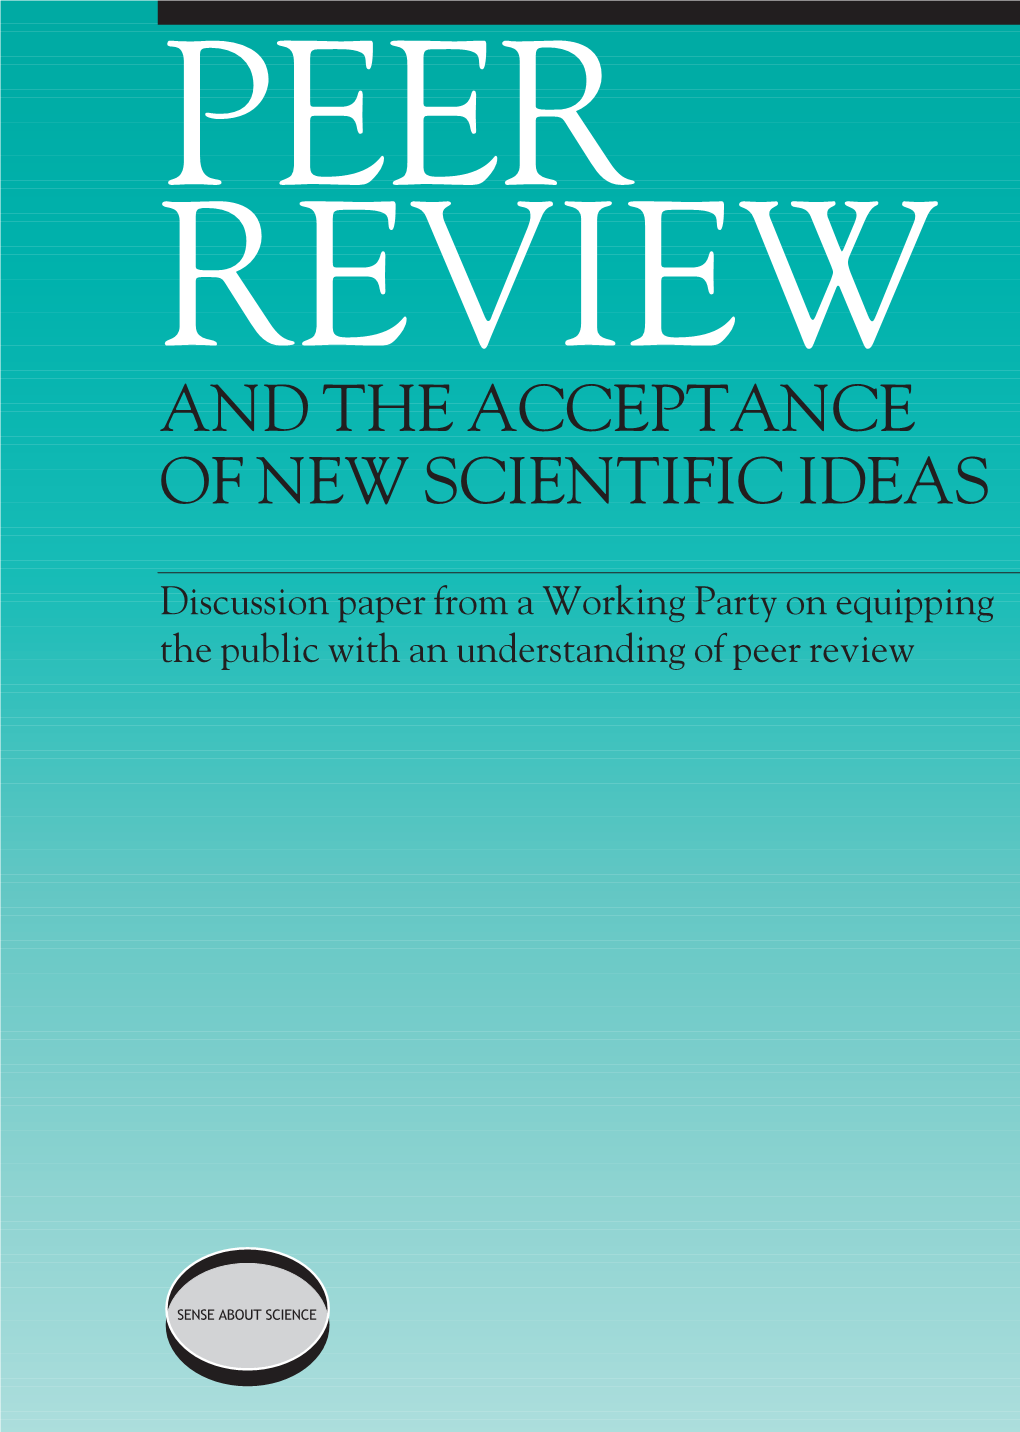 Peer Review and the Acceptance of New Ideas